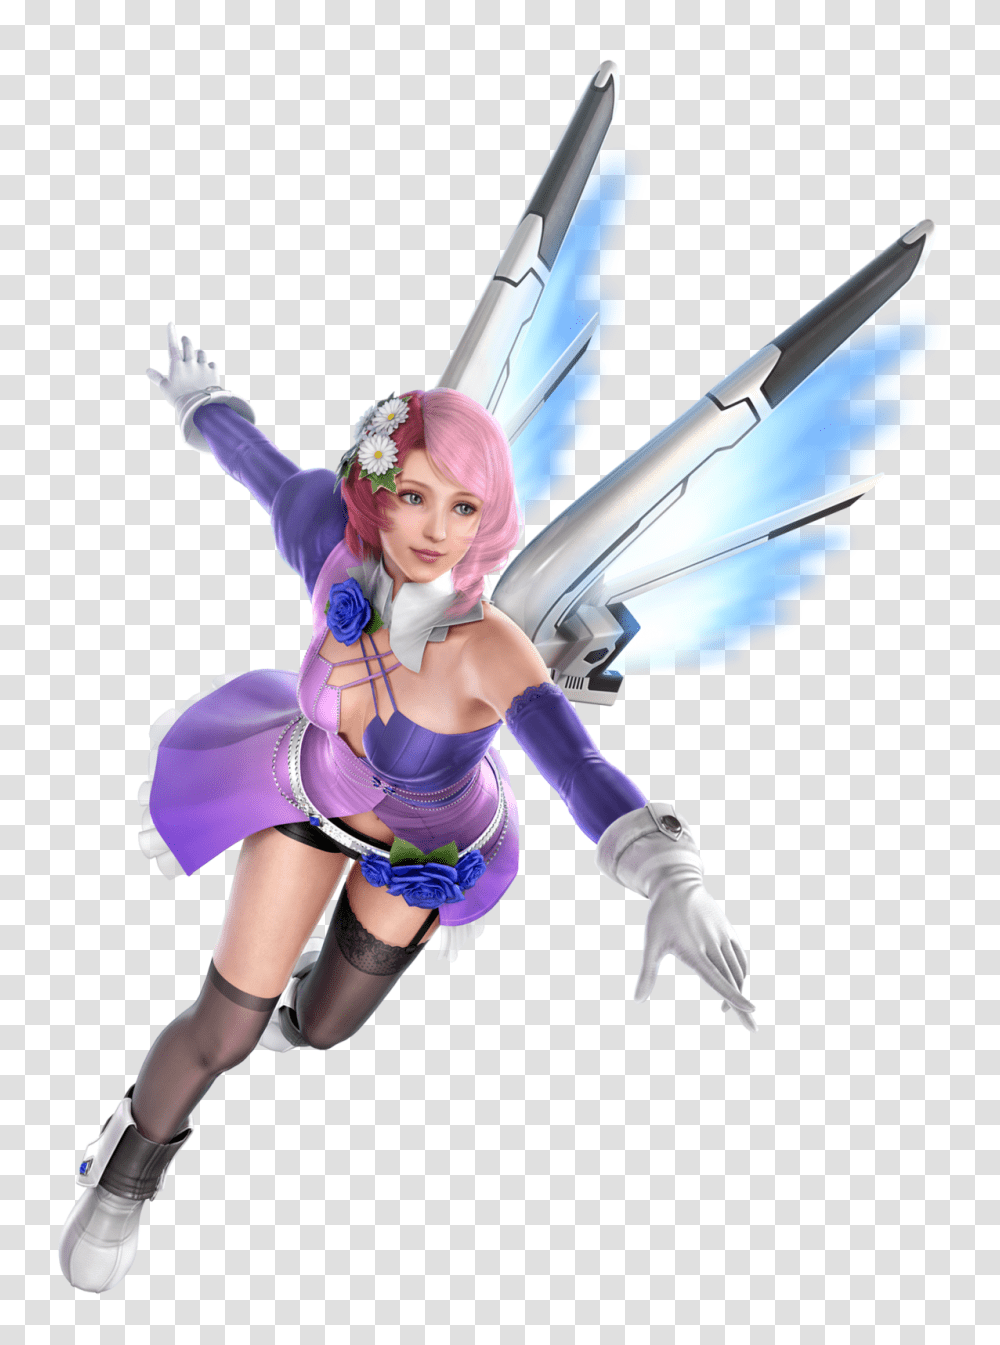 Tekkenalisa Bosconovitch Strategywiki The Video Game, Costume, Person, Leisure Activities, Dance Pose Transparent Png